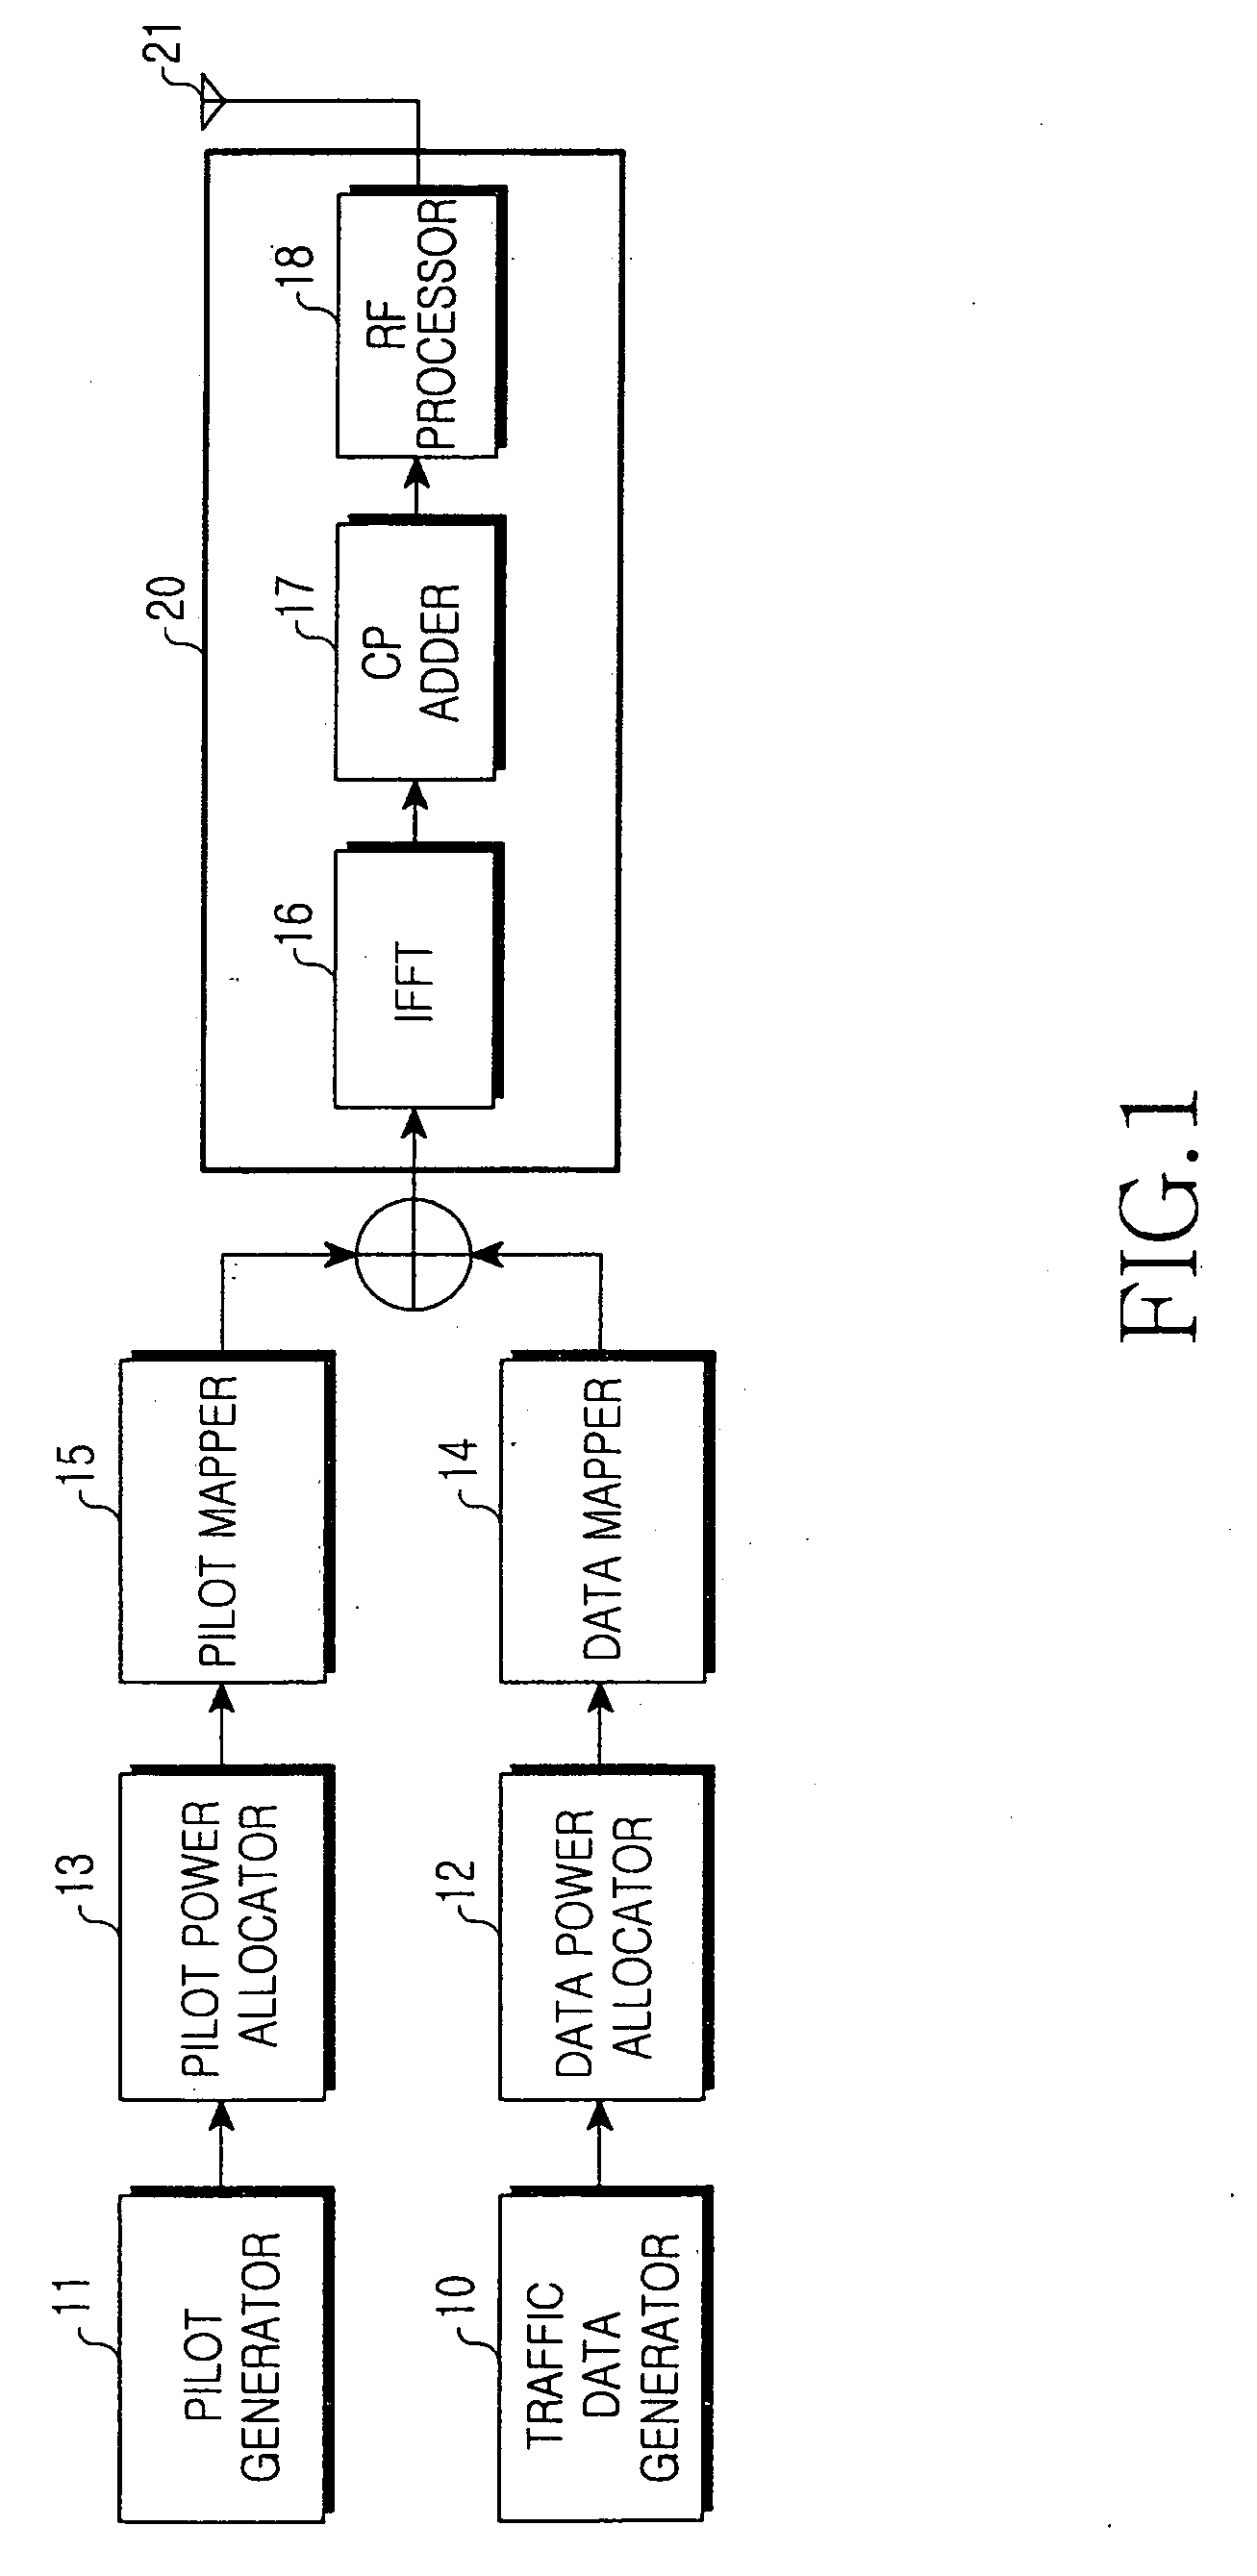 Apparatus and method for transmitting and receiving pilot signal using multiple antennas in a mobile communication system